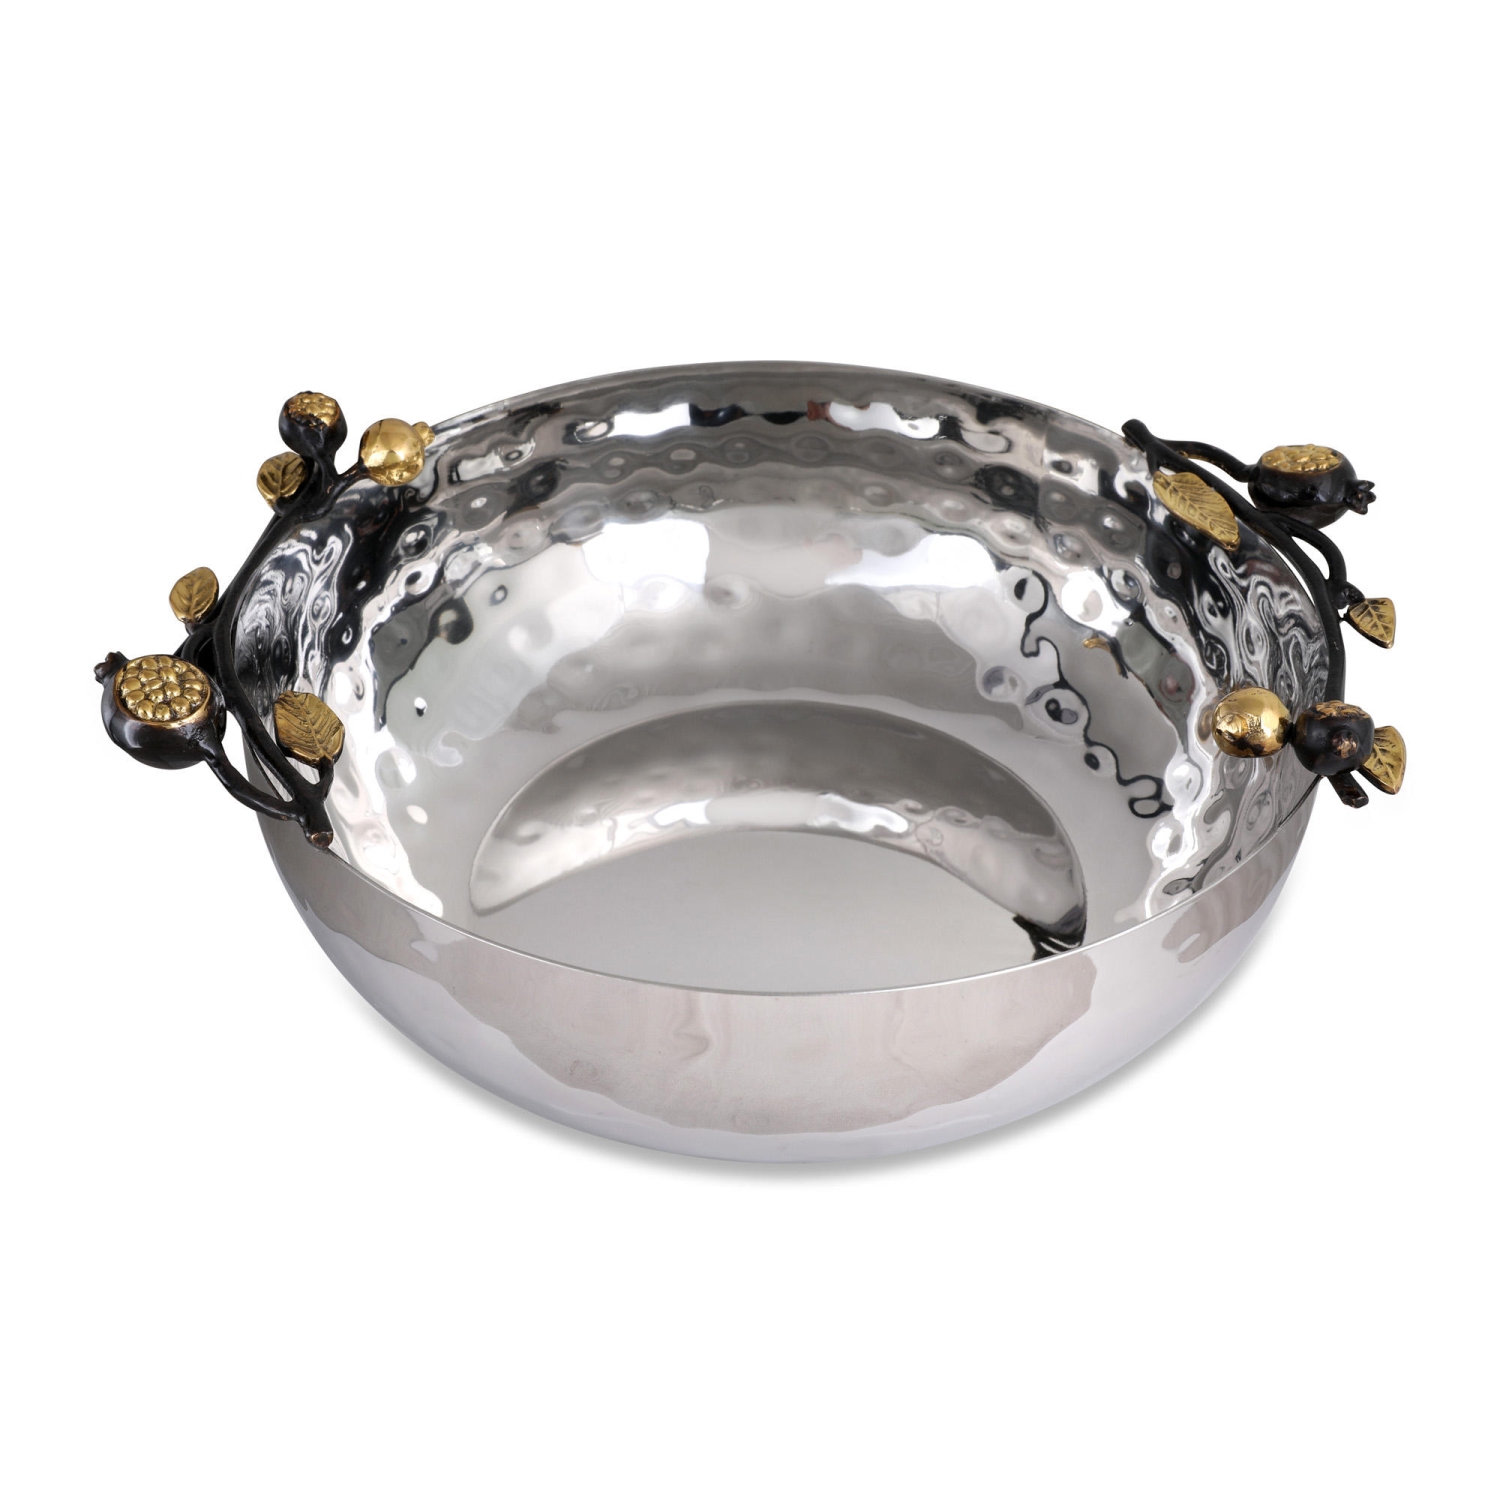 Yair Emanuel Stainless Steel Pomegranate Bowl - Large - 1